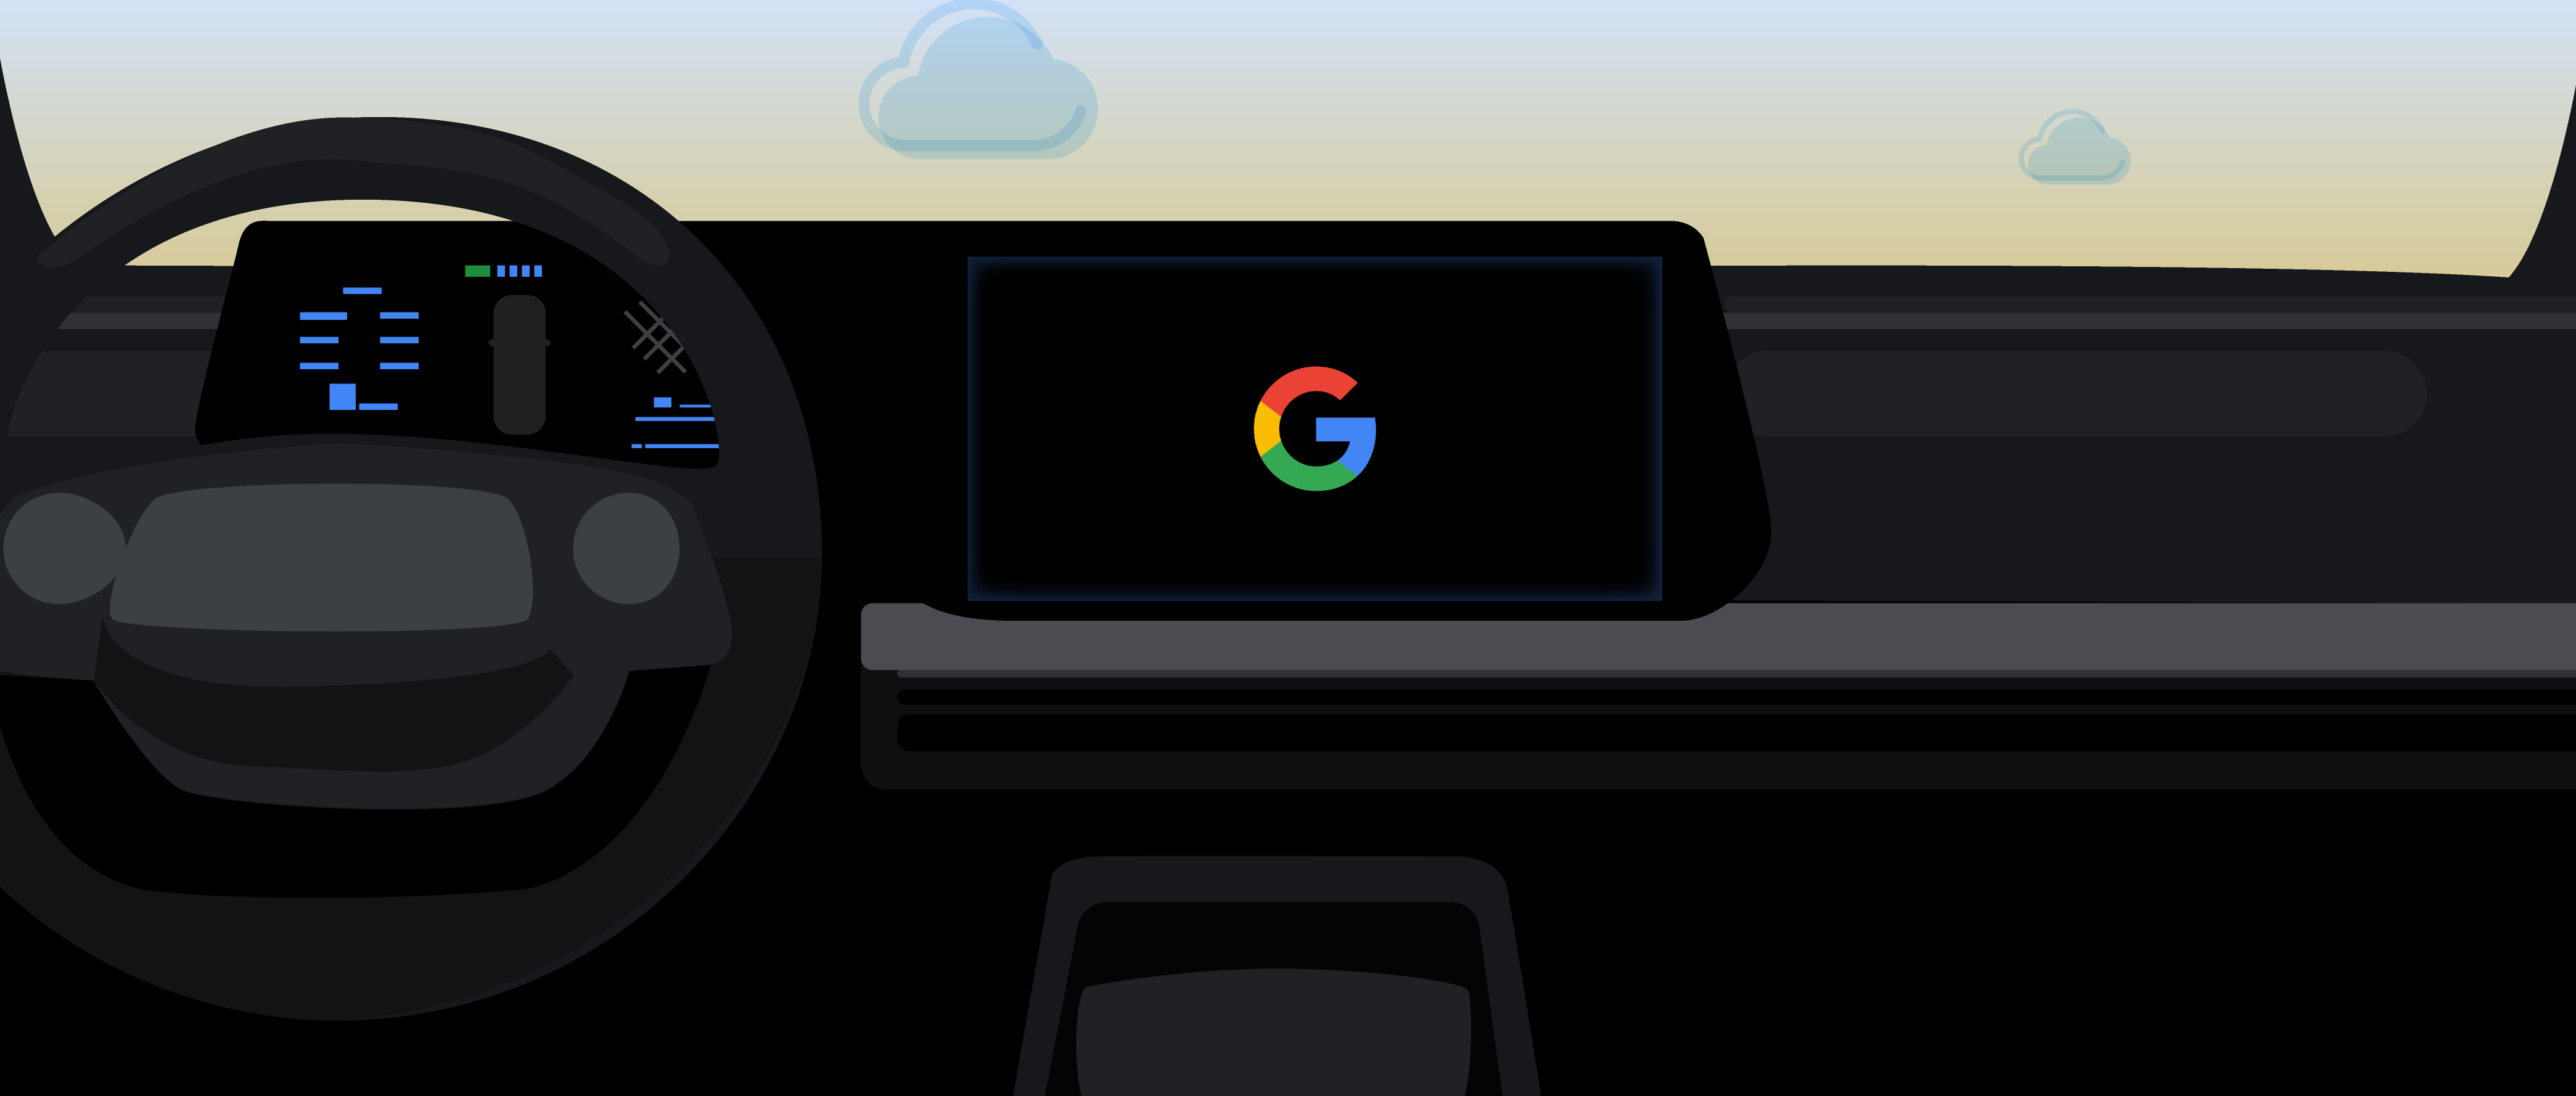 Android for Cars | Google Developers